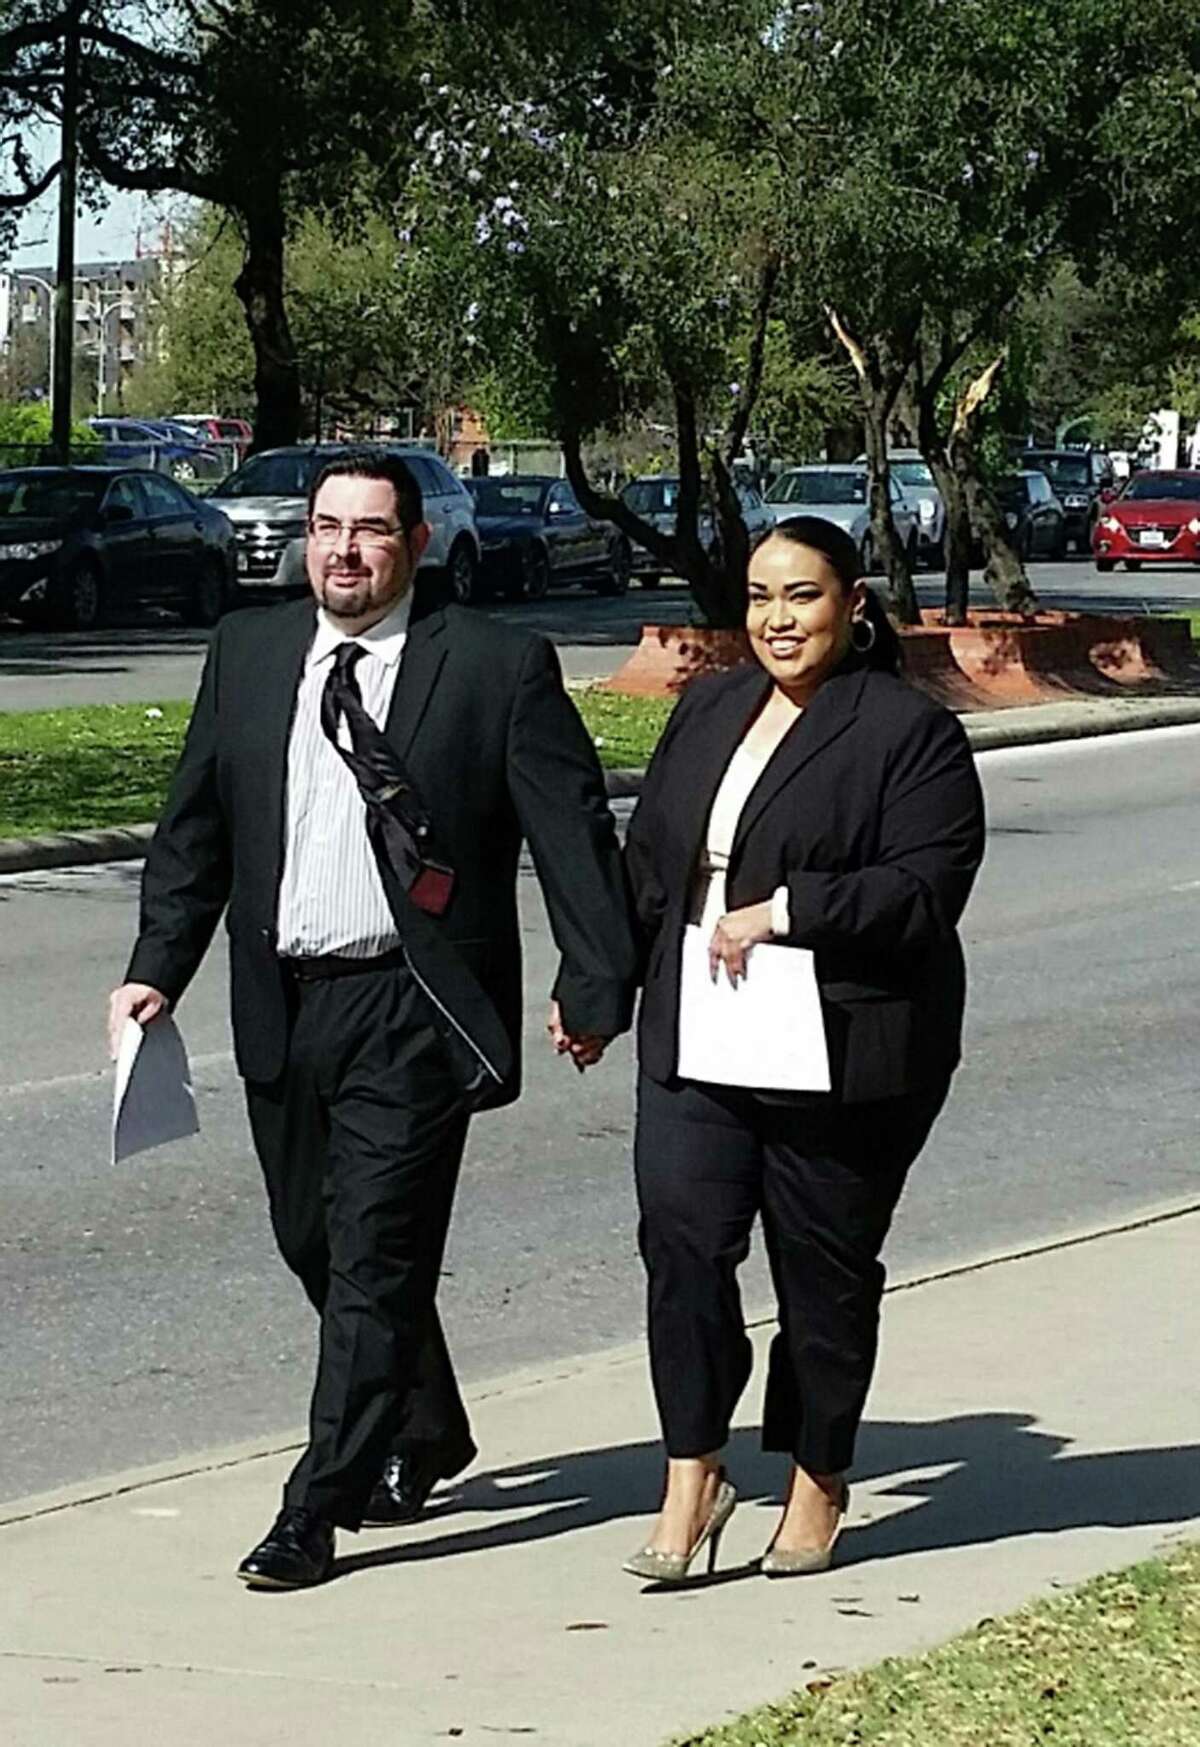 Eric Jon Alva and Jessica Rivas Alva leave federal court in San Antonio on Thursday after pleading guilty to defrauding immigrants.